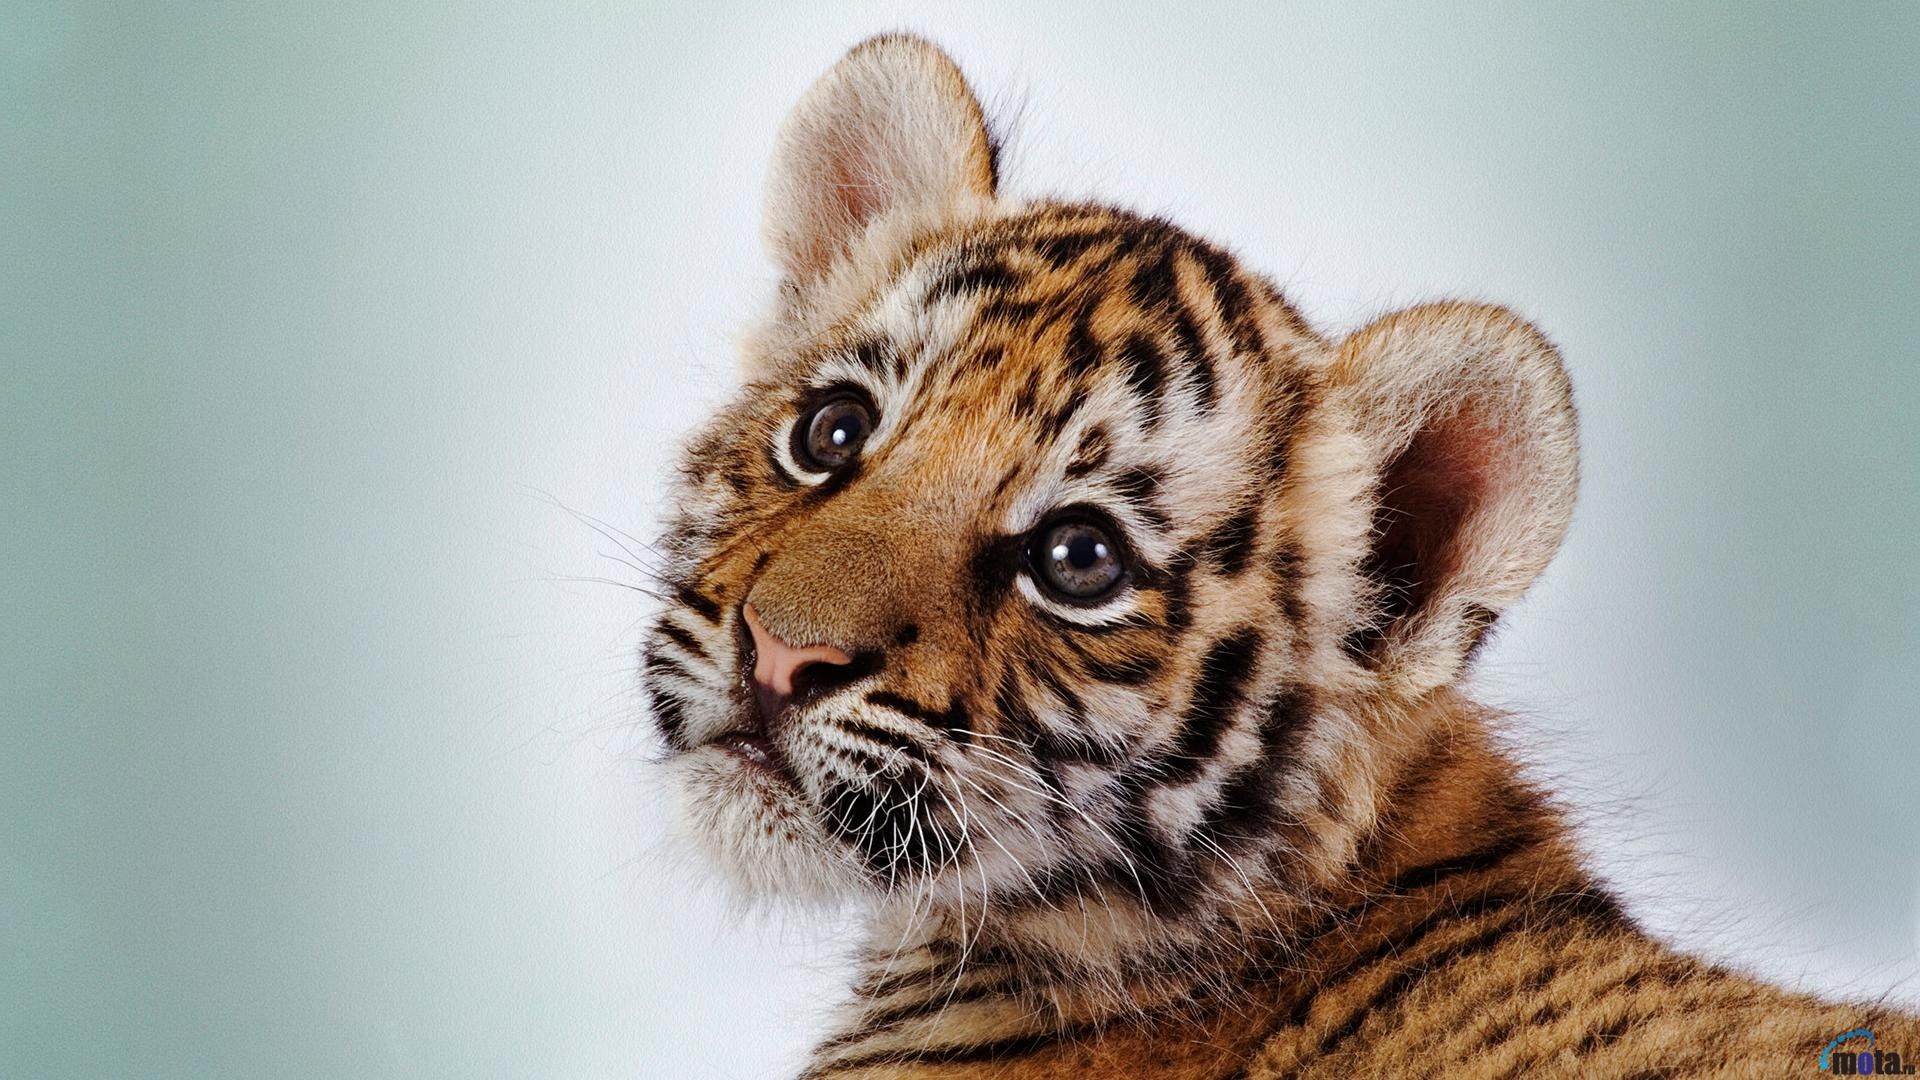 Wallpaper, cute, picture, tiger, high, quality